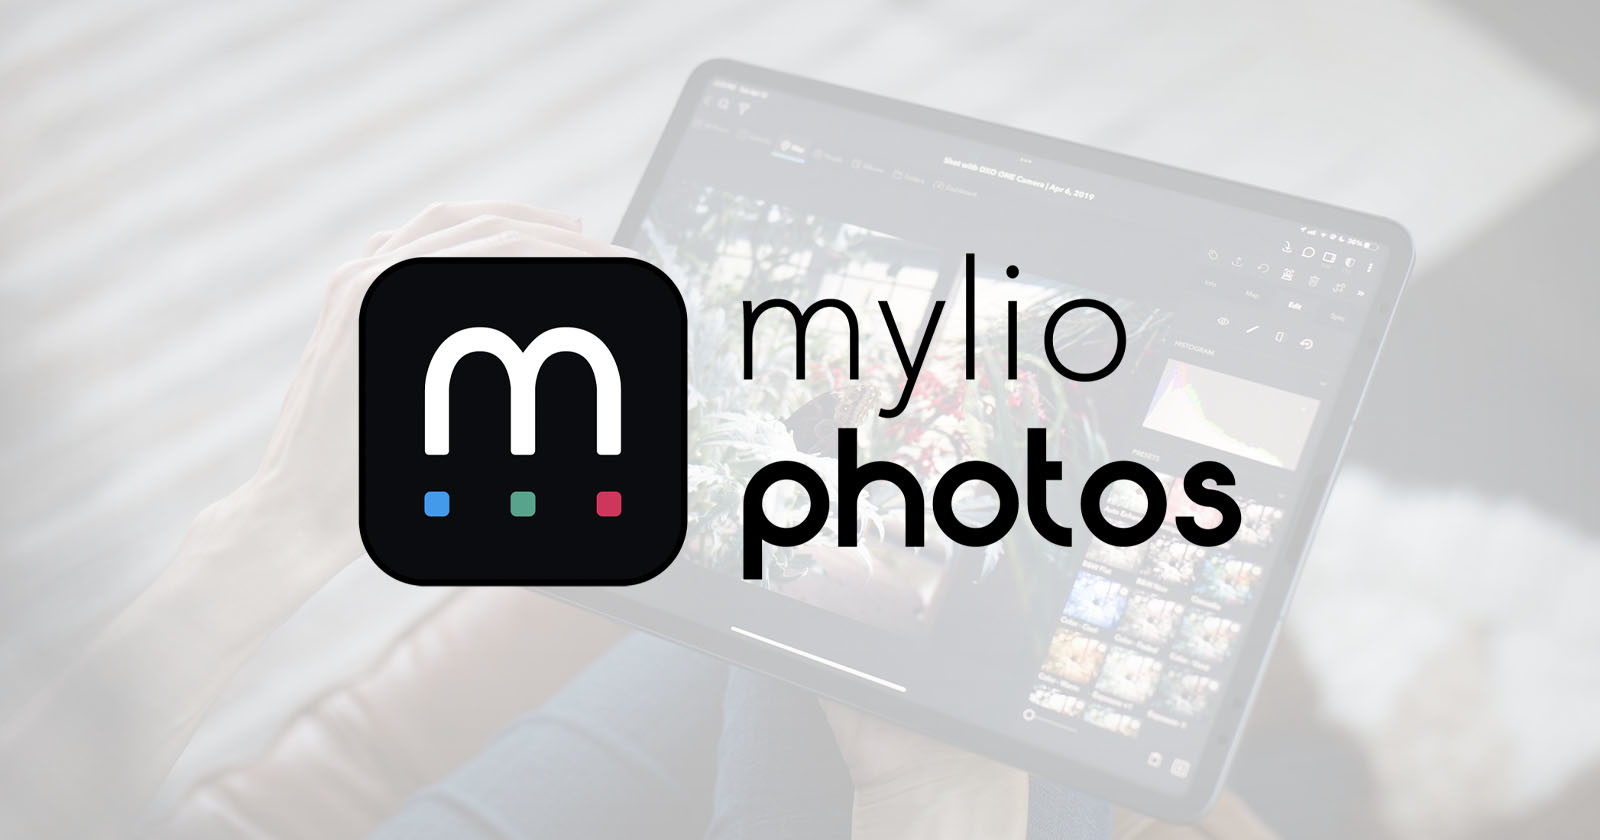  mylio photos can sync your across devices 